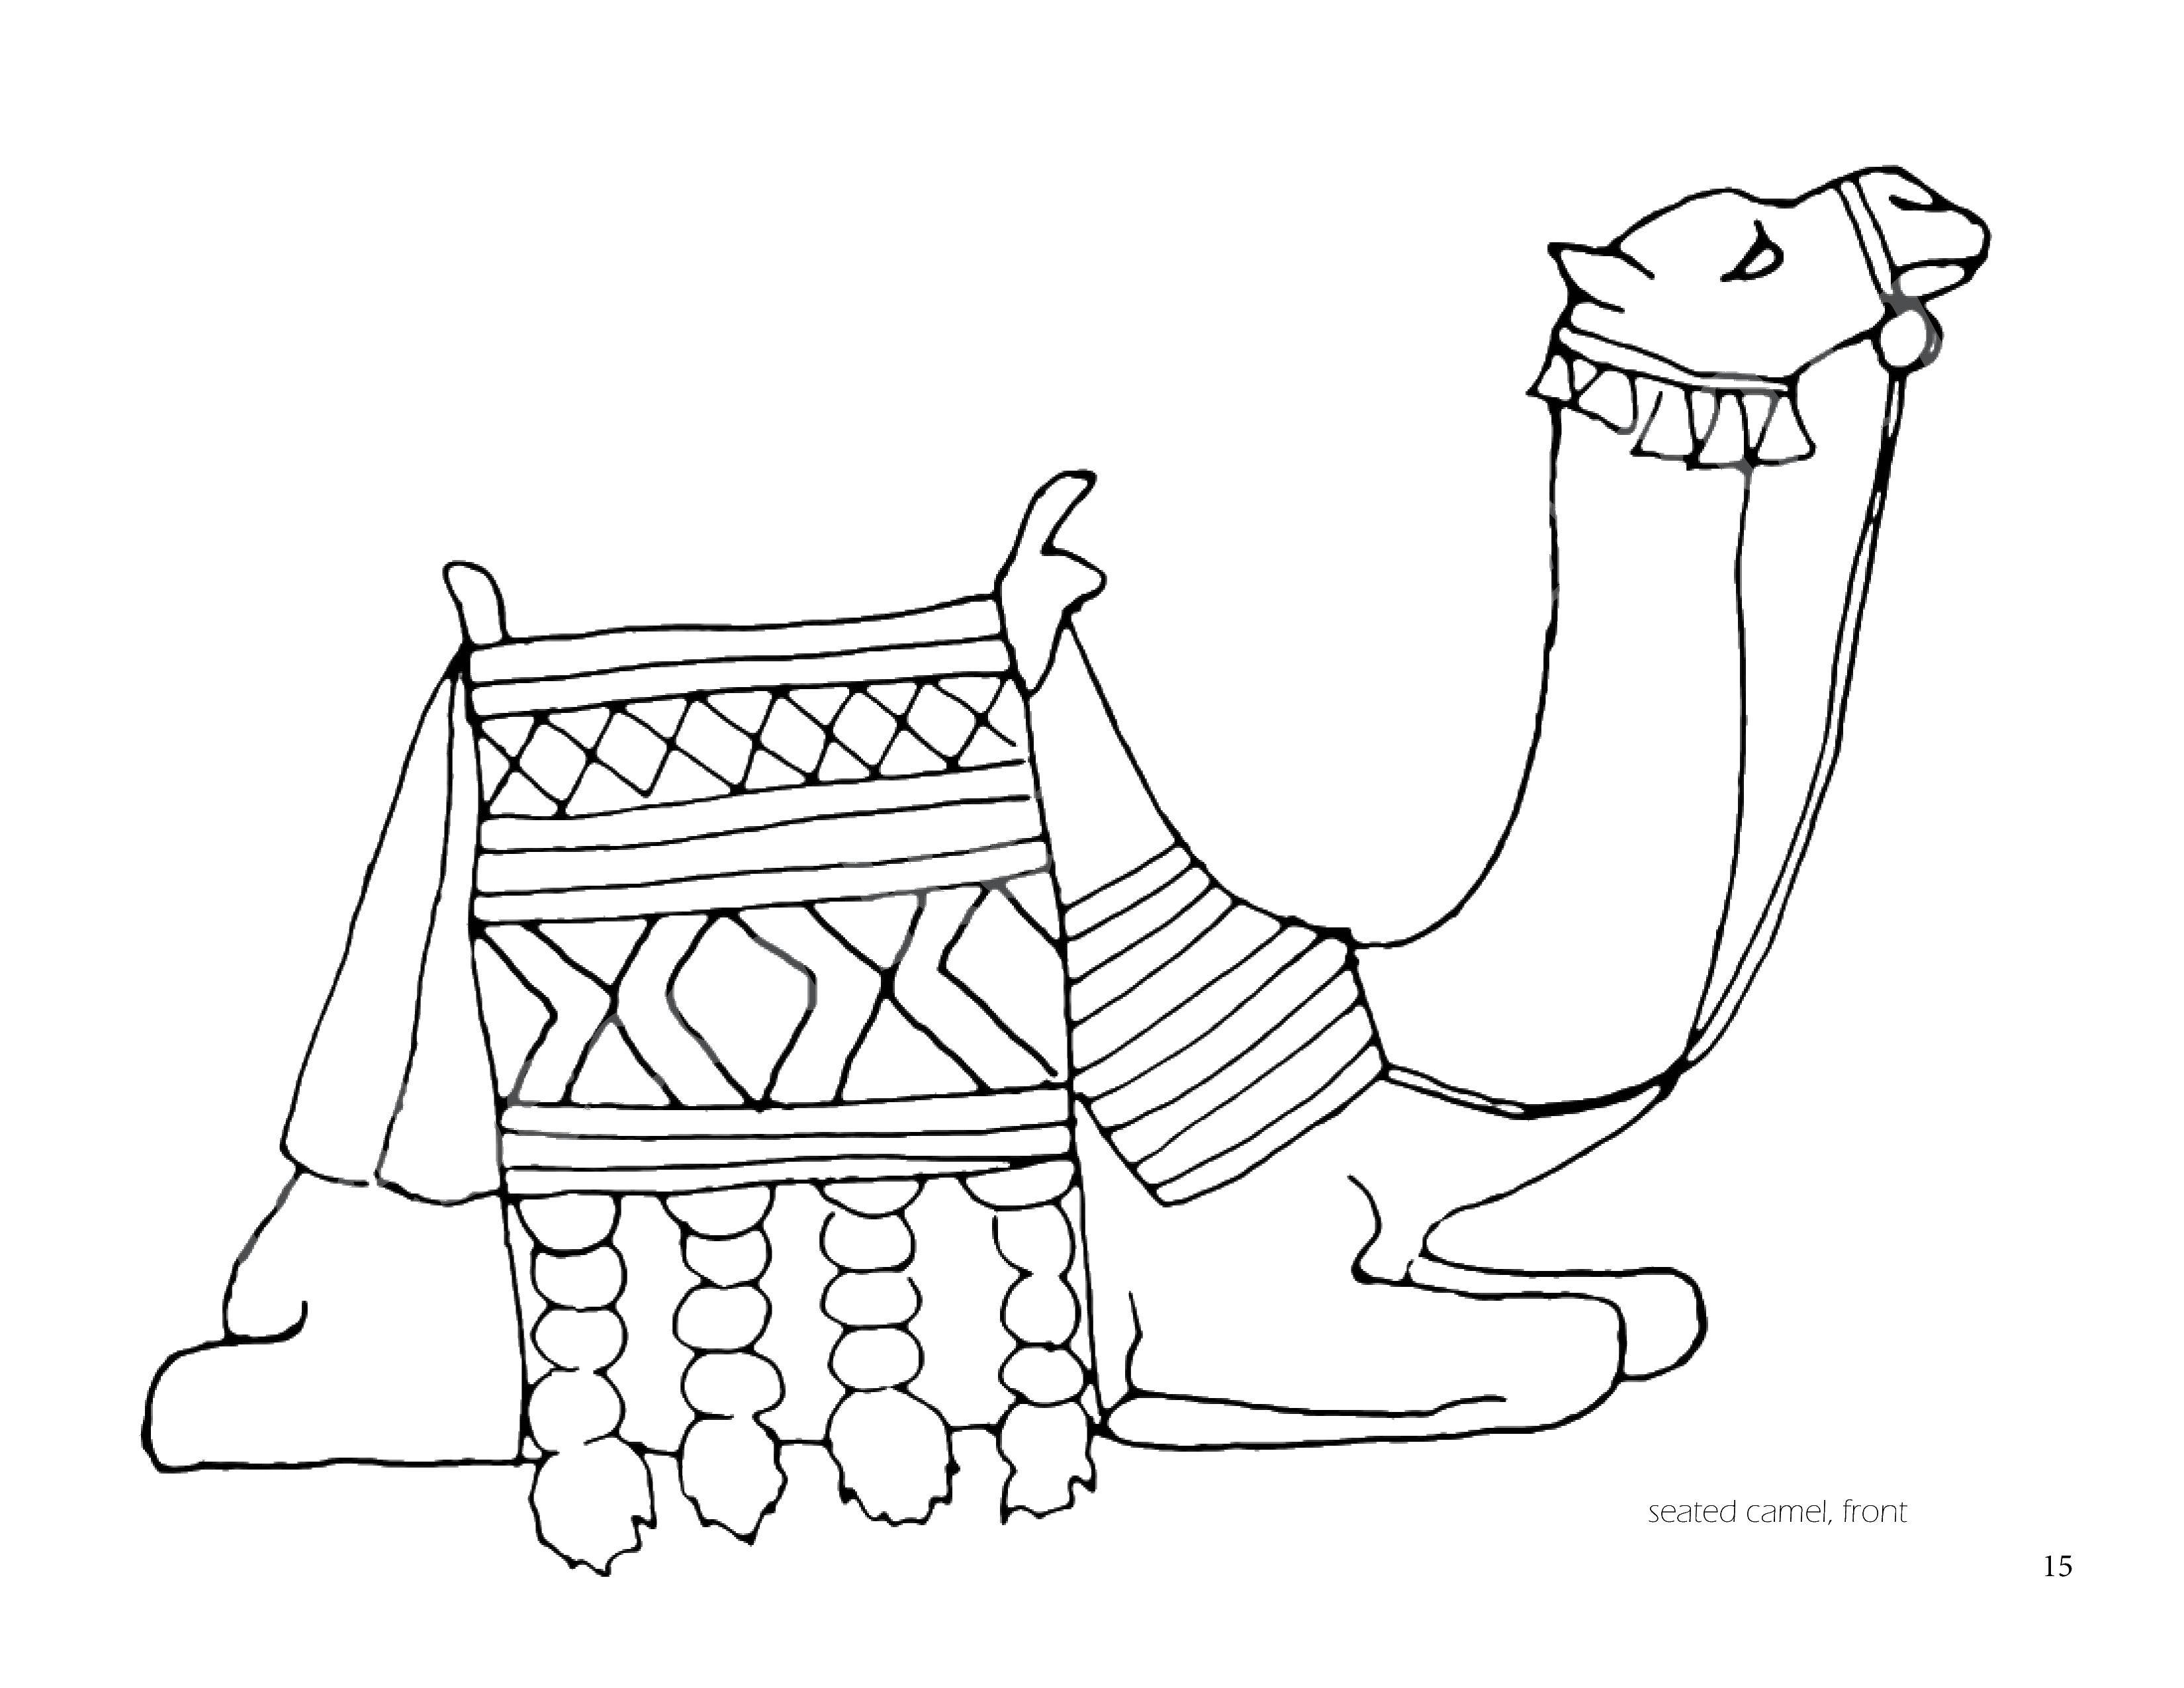 Coloring Camel. Category Animals. Tags:  animals, camels.